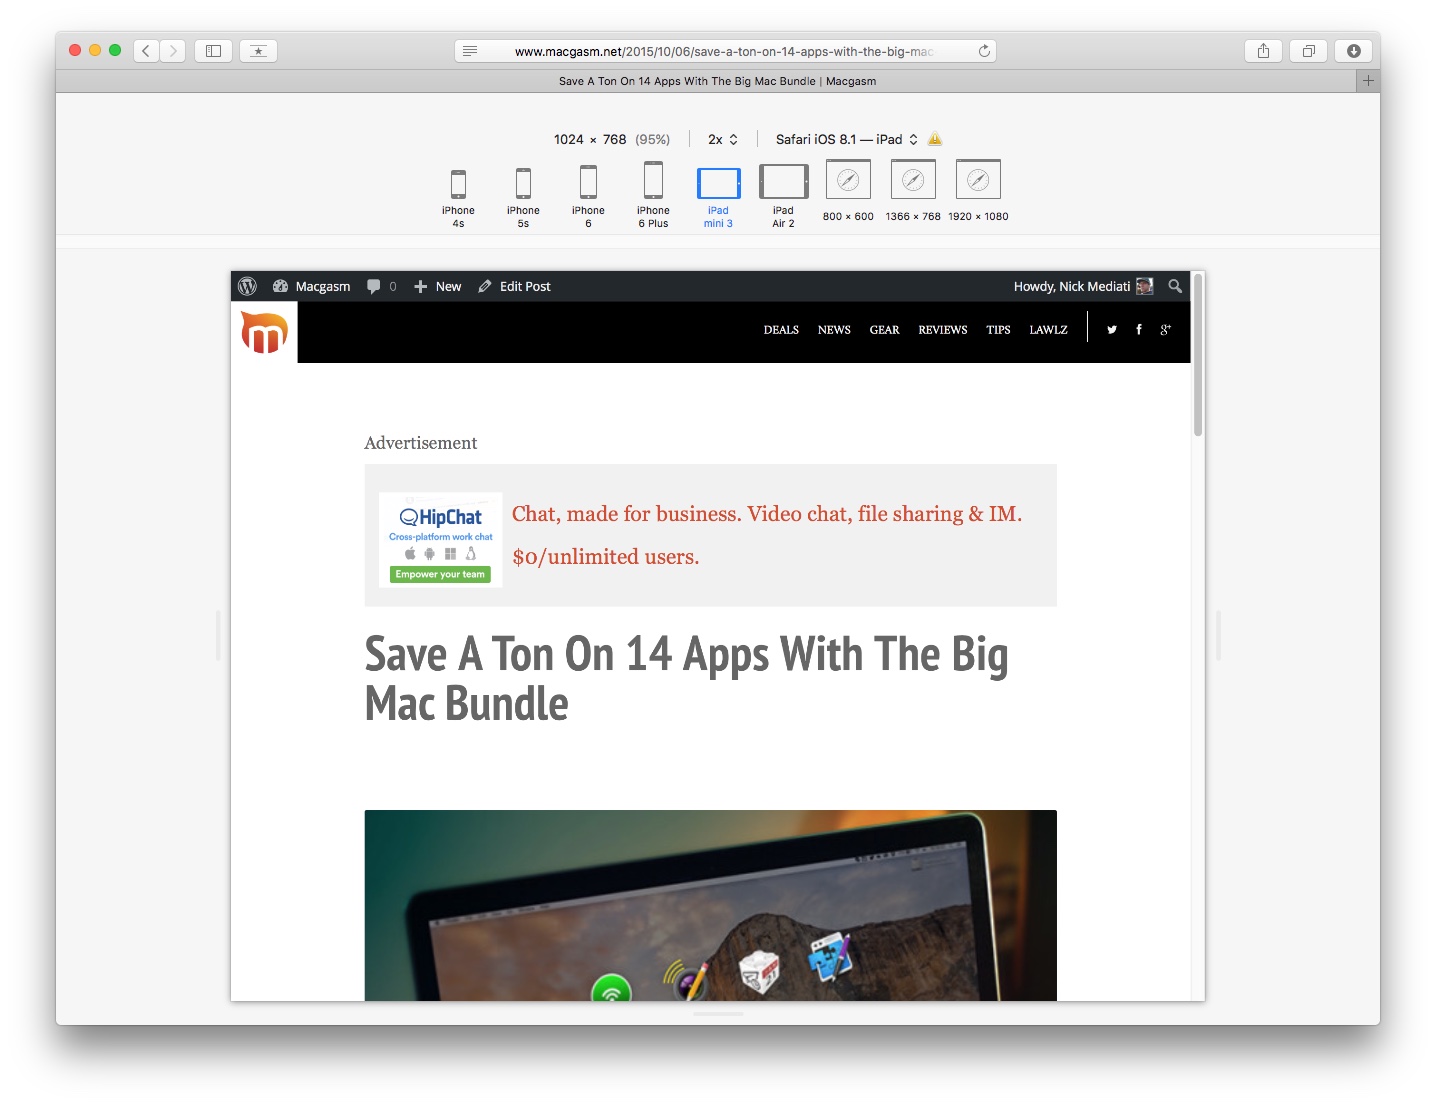 A Macgasm article page, as viewed in responsive design mode.